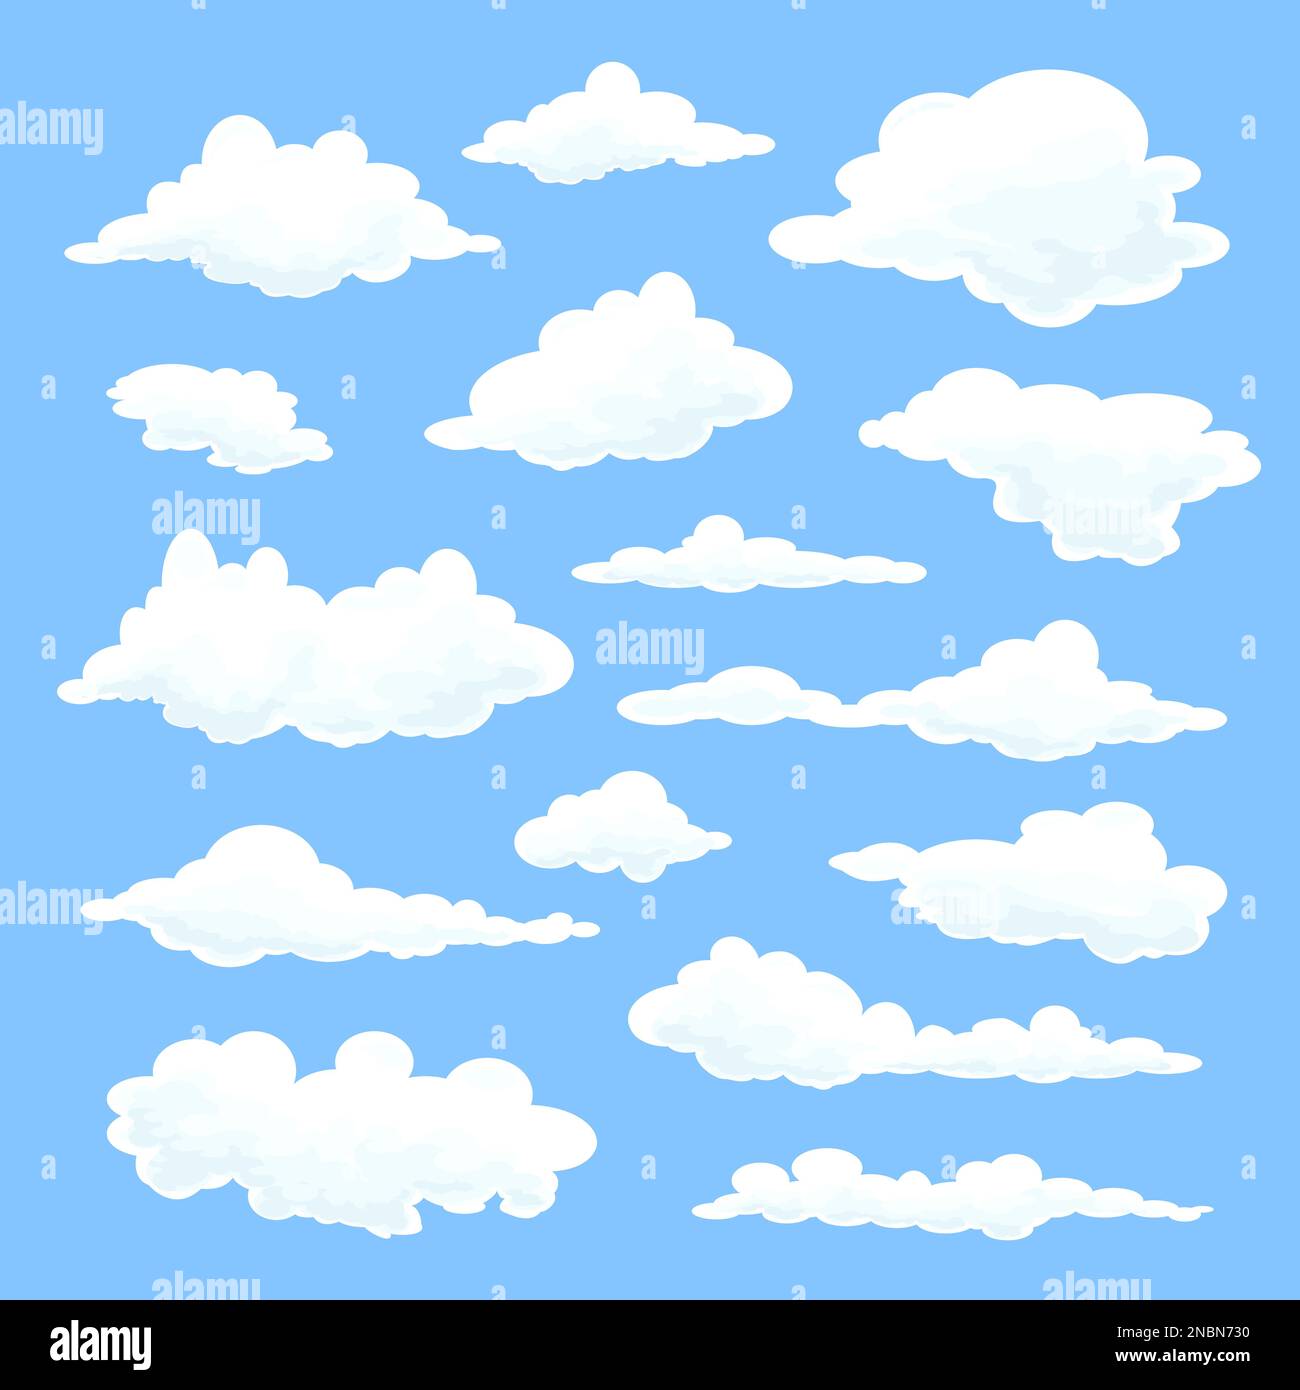 Set of clouds in a flat design on a blue background Stock Vector